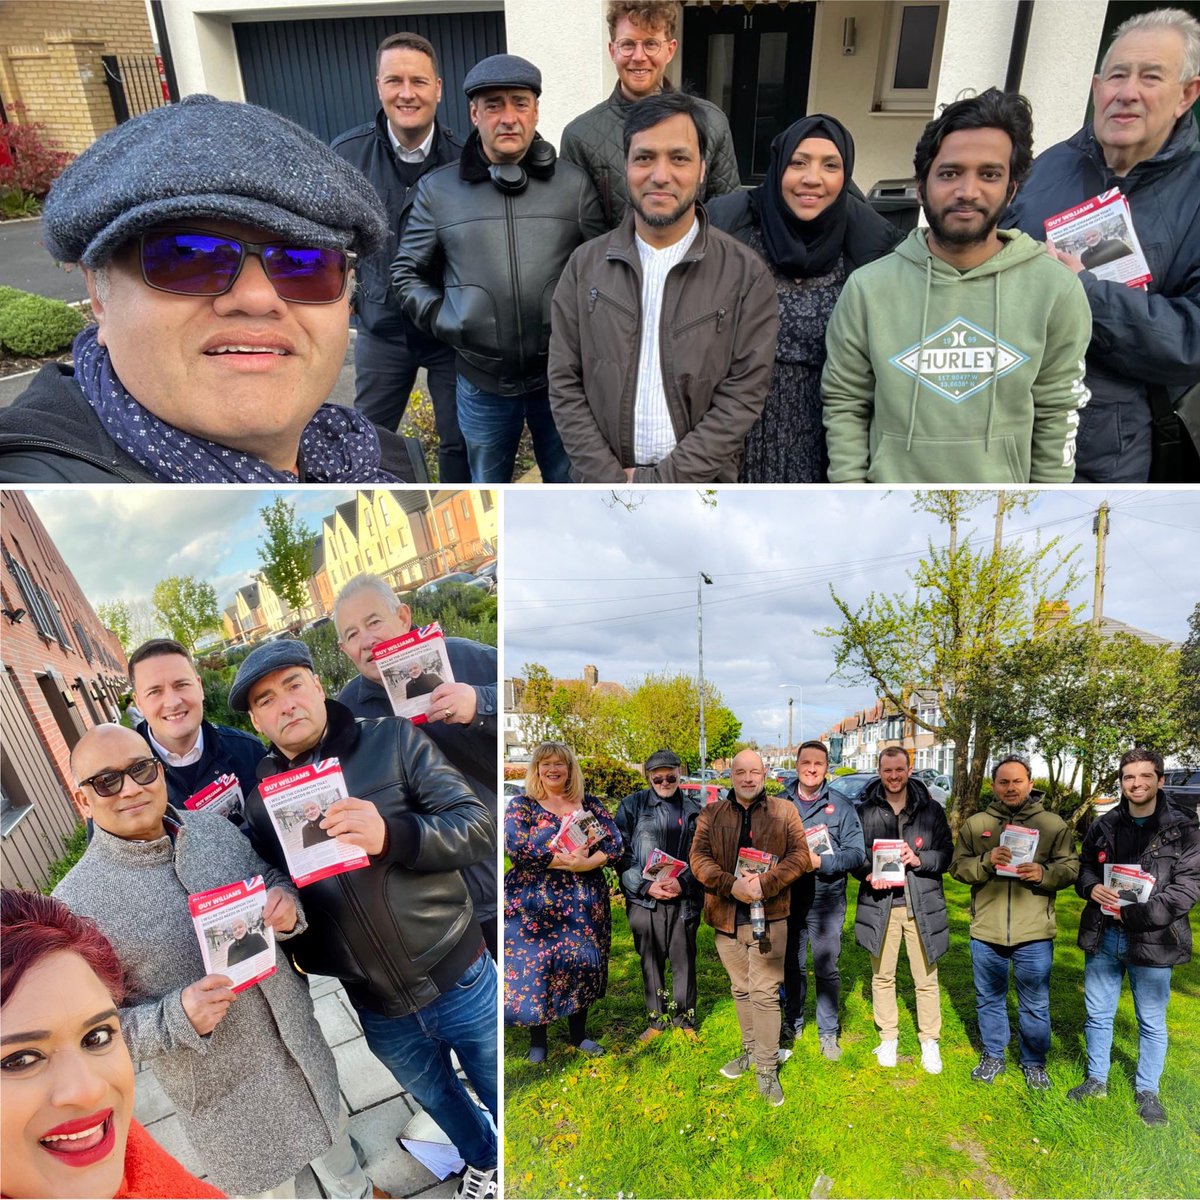 Good to talk to so many local residents in Aldborough, Hainault and Fairlop this weekend, campaigning for @SadiqKhan, @Guy__Williams, and @LondonLabour’s Assembly candidates, including @redbridgelabour’s @jhowarduk!